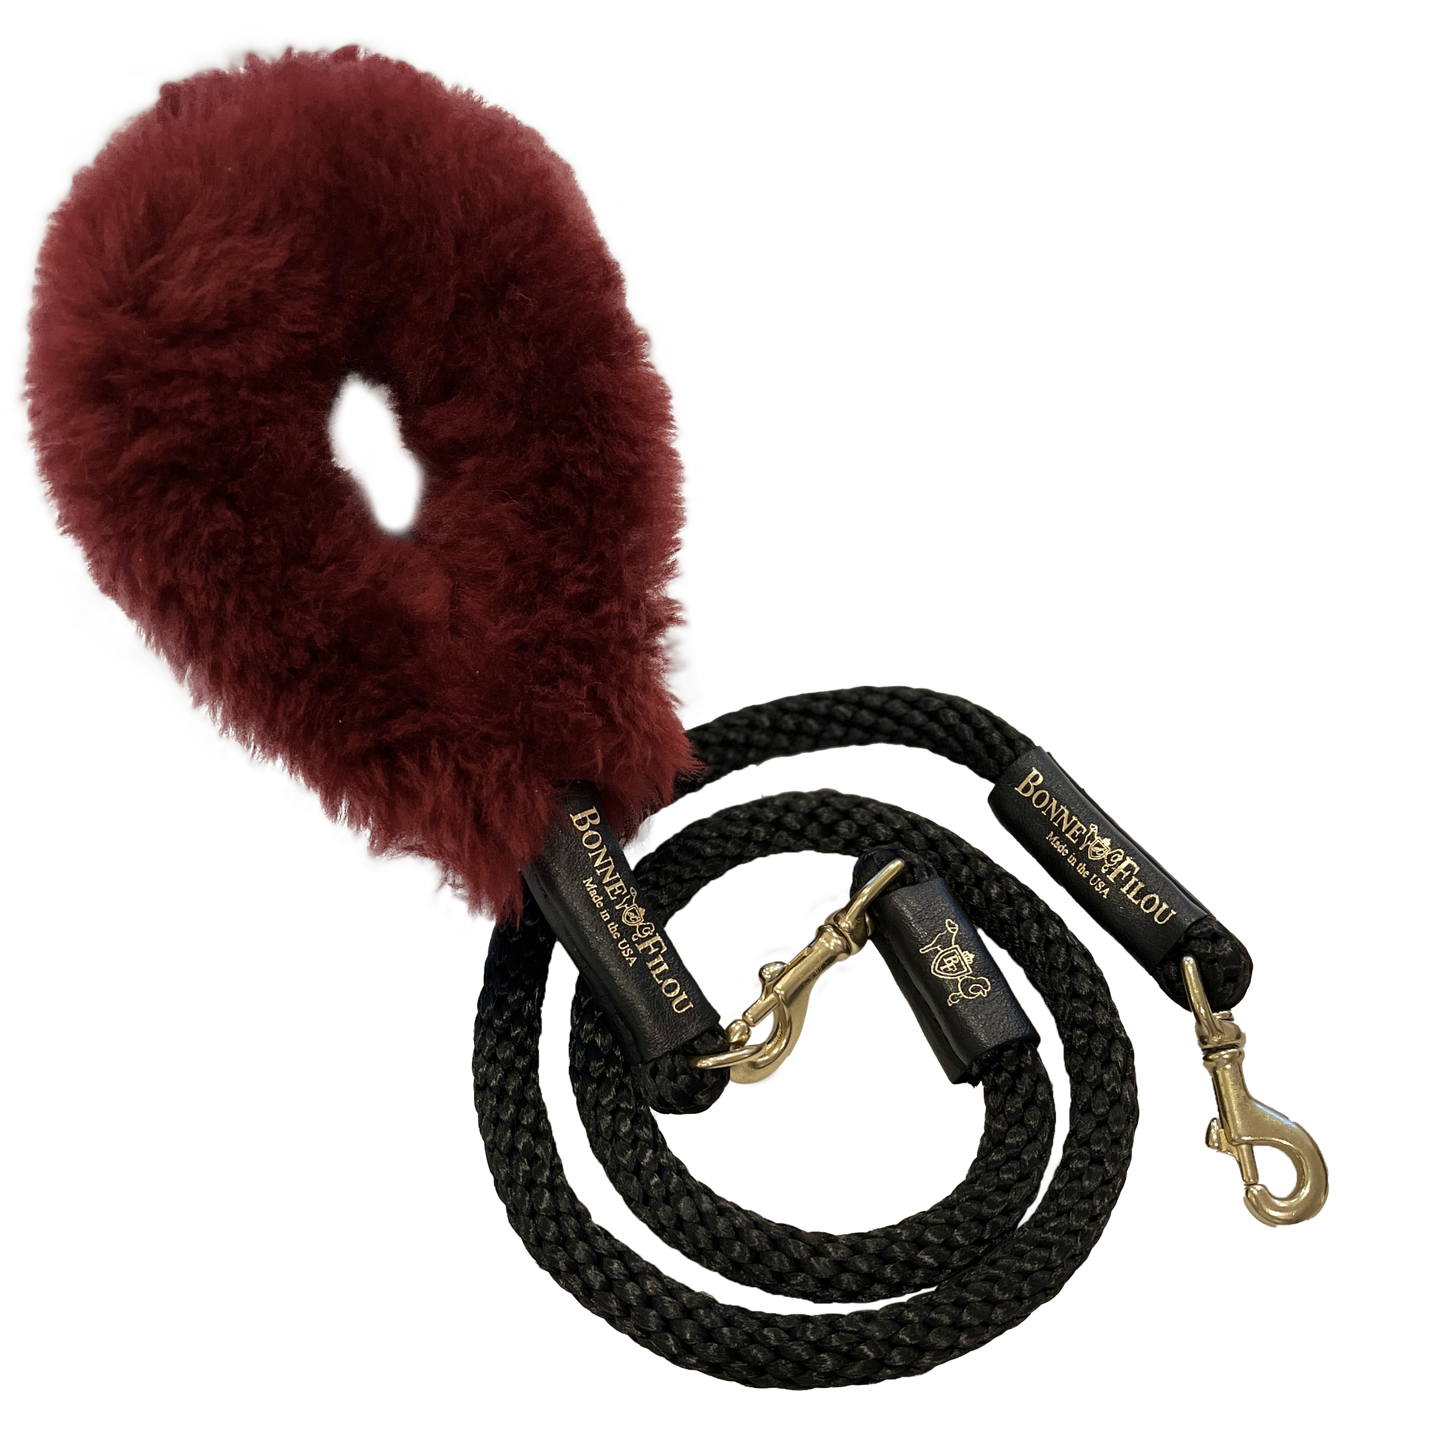 Bundle Shearling Fur Grip + Rope Leash for Dogs - Chic and Functional Dog Walking Accessory